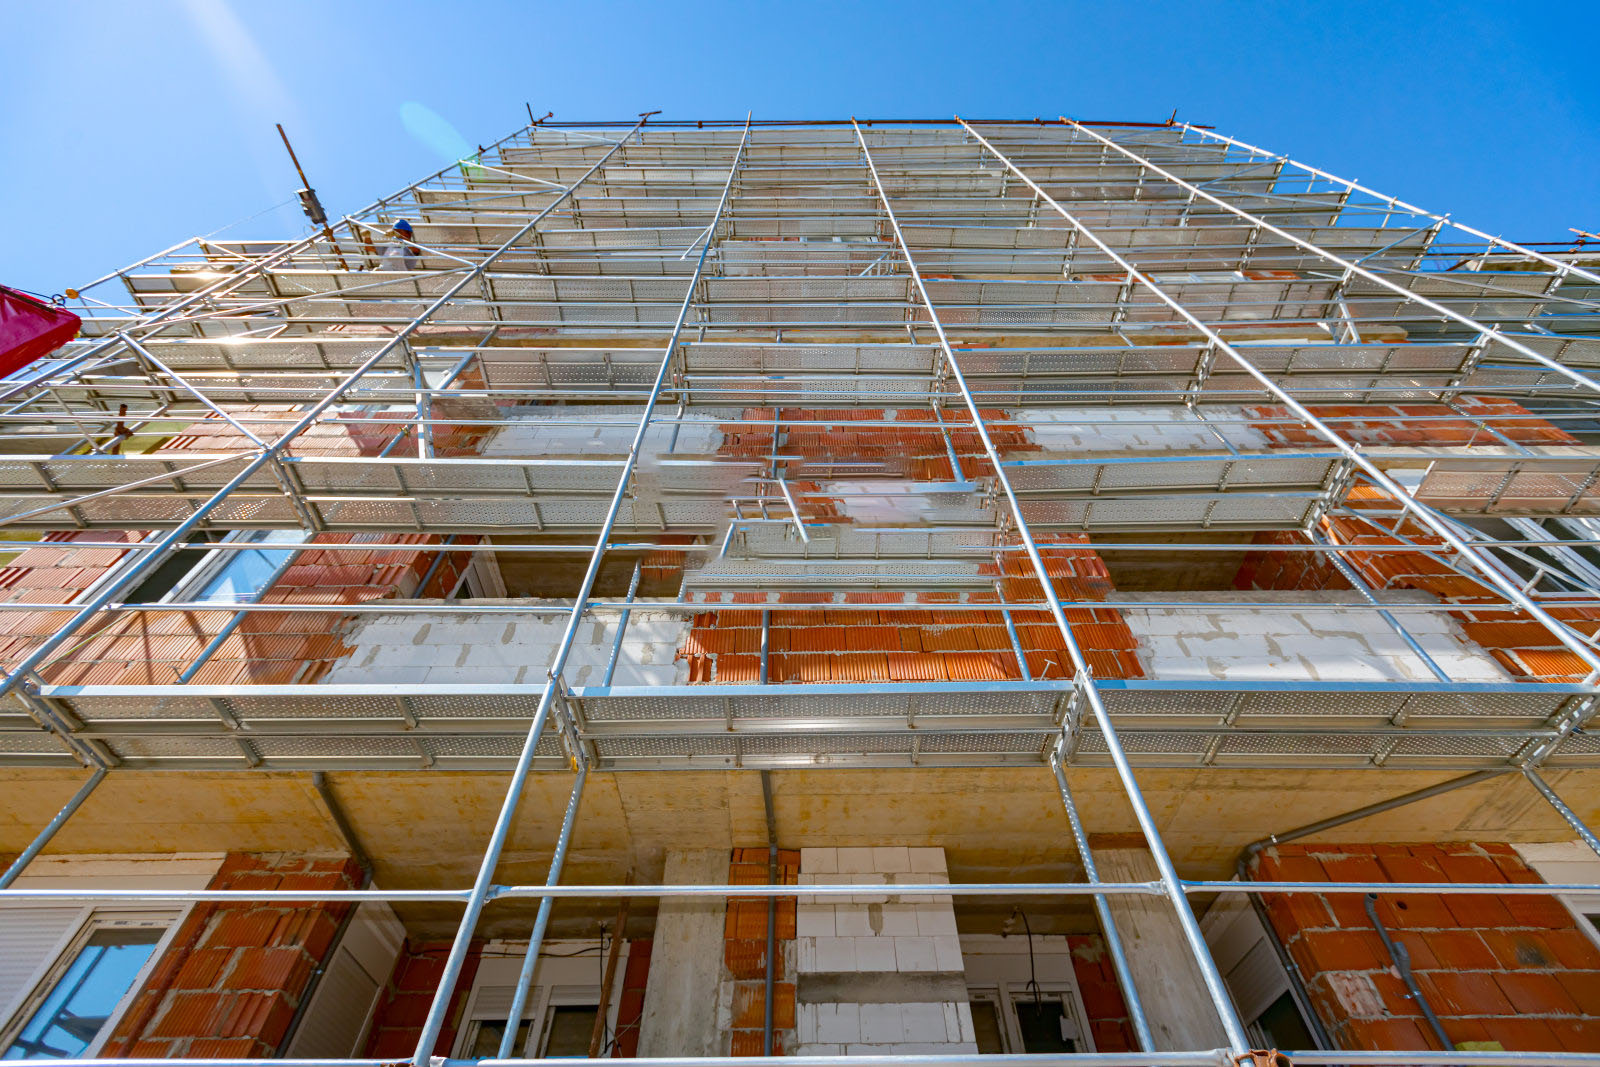 View from below on scaffold placed against unfinished edifice, new residential building under construction.